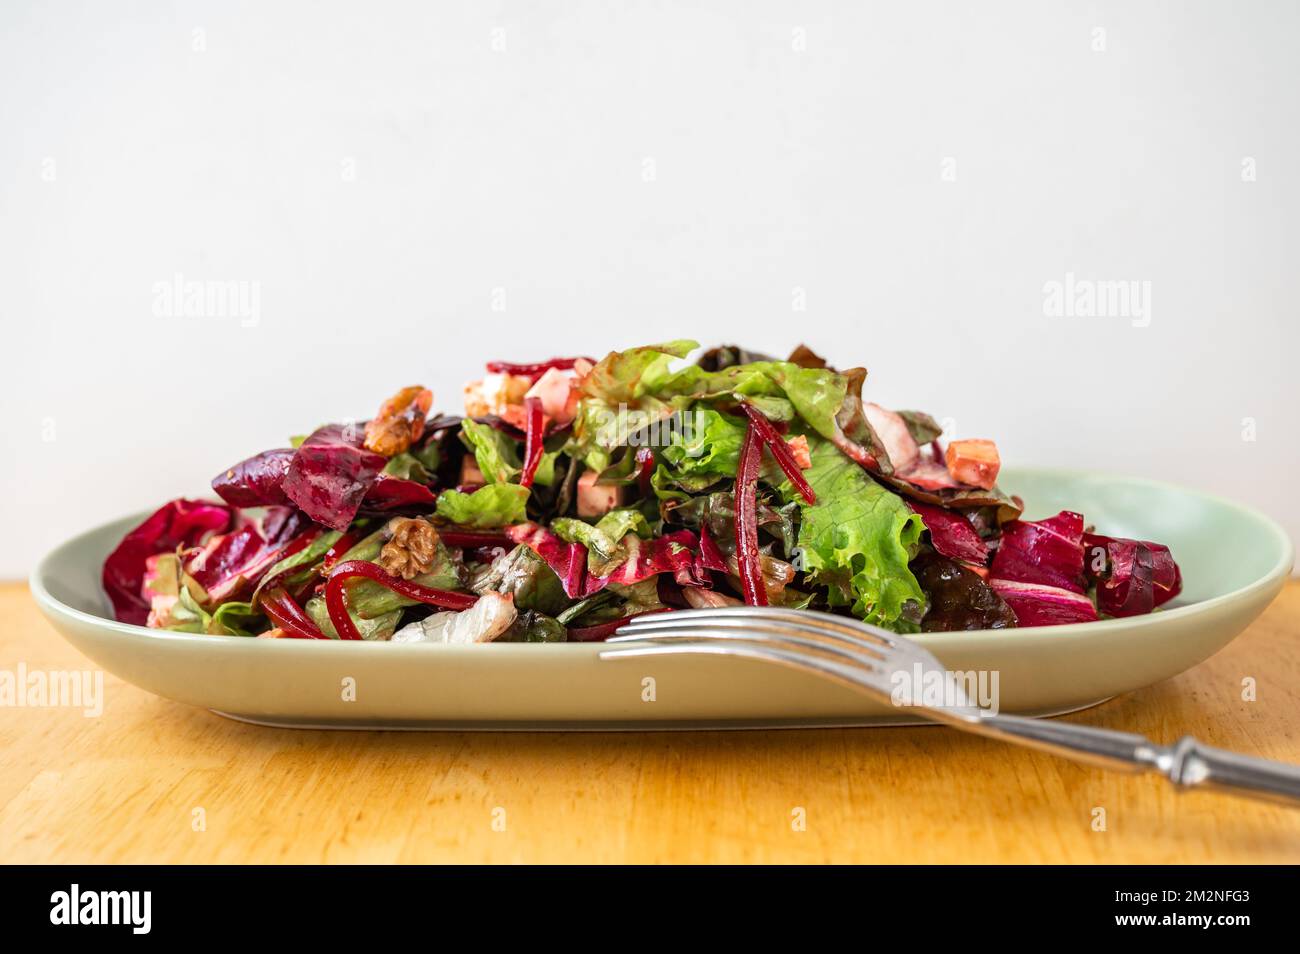 Red and green salad leaf with sliced beetroot, tofu cube and walnut on oval plate, fork on wooden table, closeup. Stock Photo